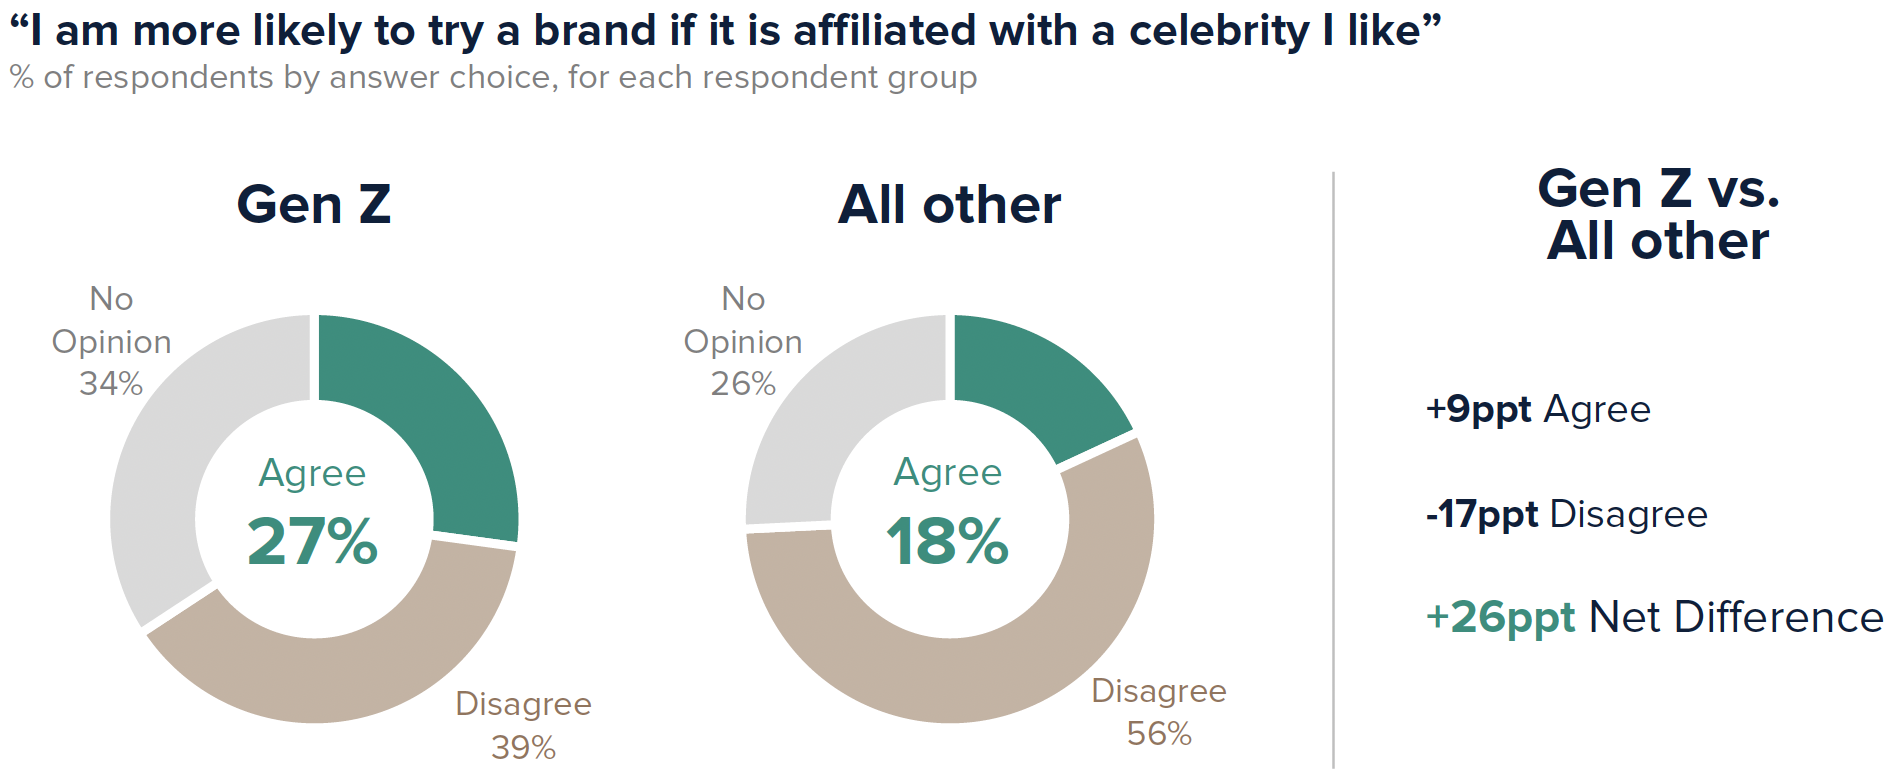 27% of Gen Z says “I am more likely to try a brand if it is affiliated with a celebrity I like”